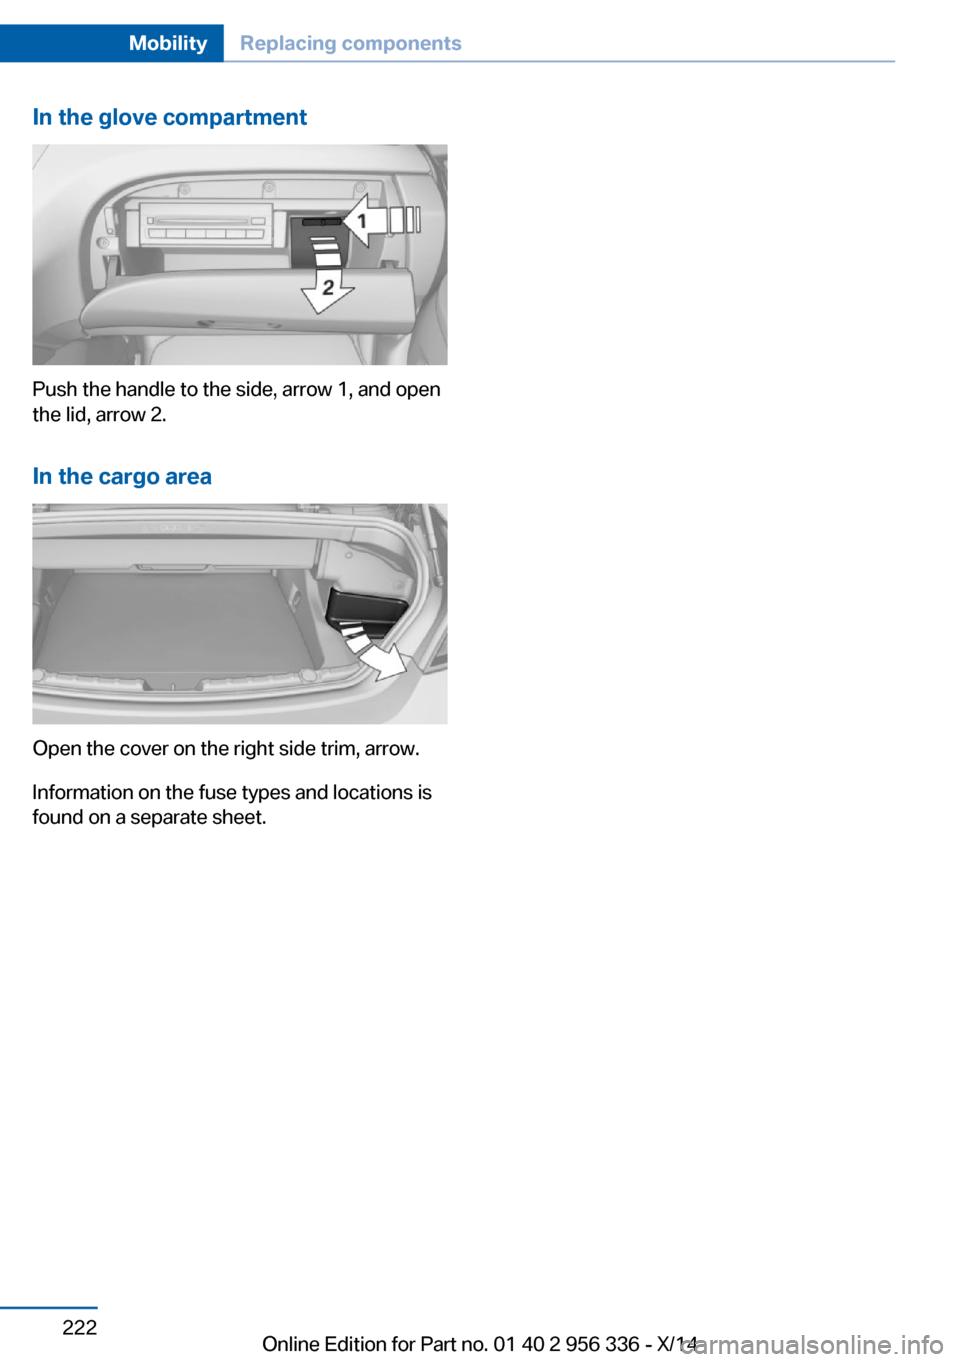 BMW 6 SERIES CONVERTIBLE 2014 F12 Owners Manual In the glove compartment
Push the handle to the side, arrow 1, and open
the lid, arrow 2.
In the cargo area
Open the cover on the right side trim, arrow.
Information on the fuse types and locations is